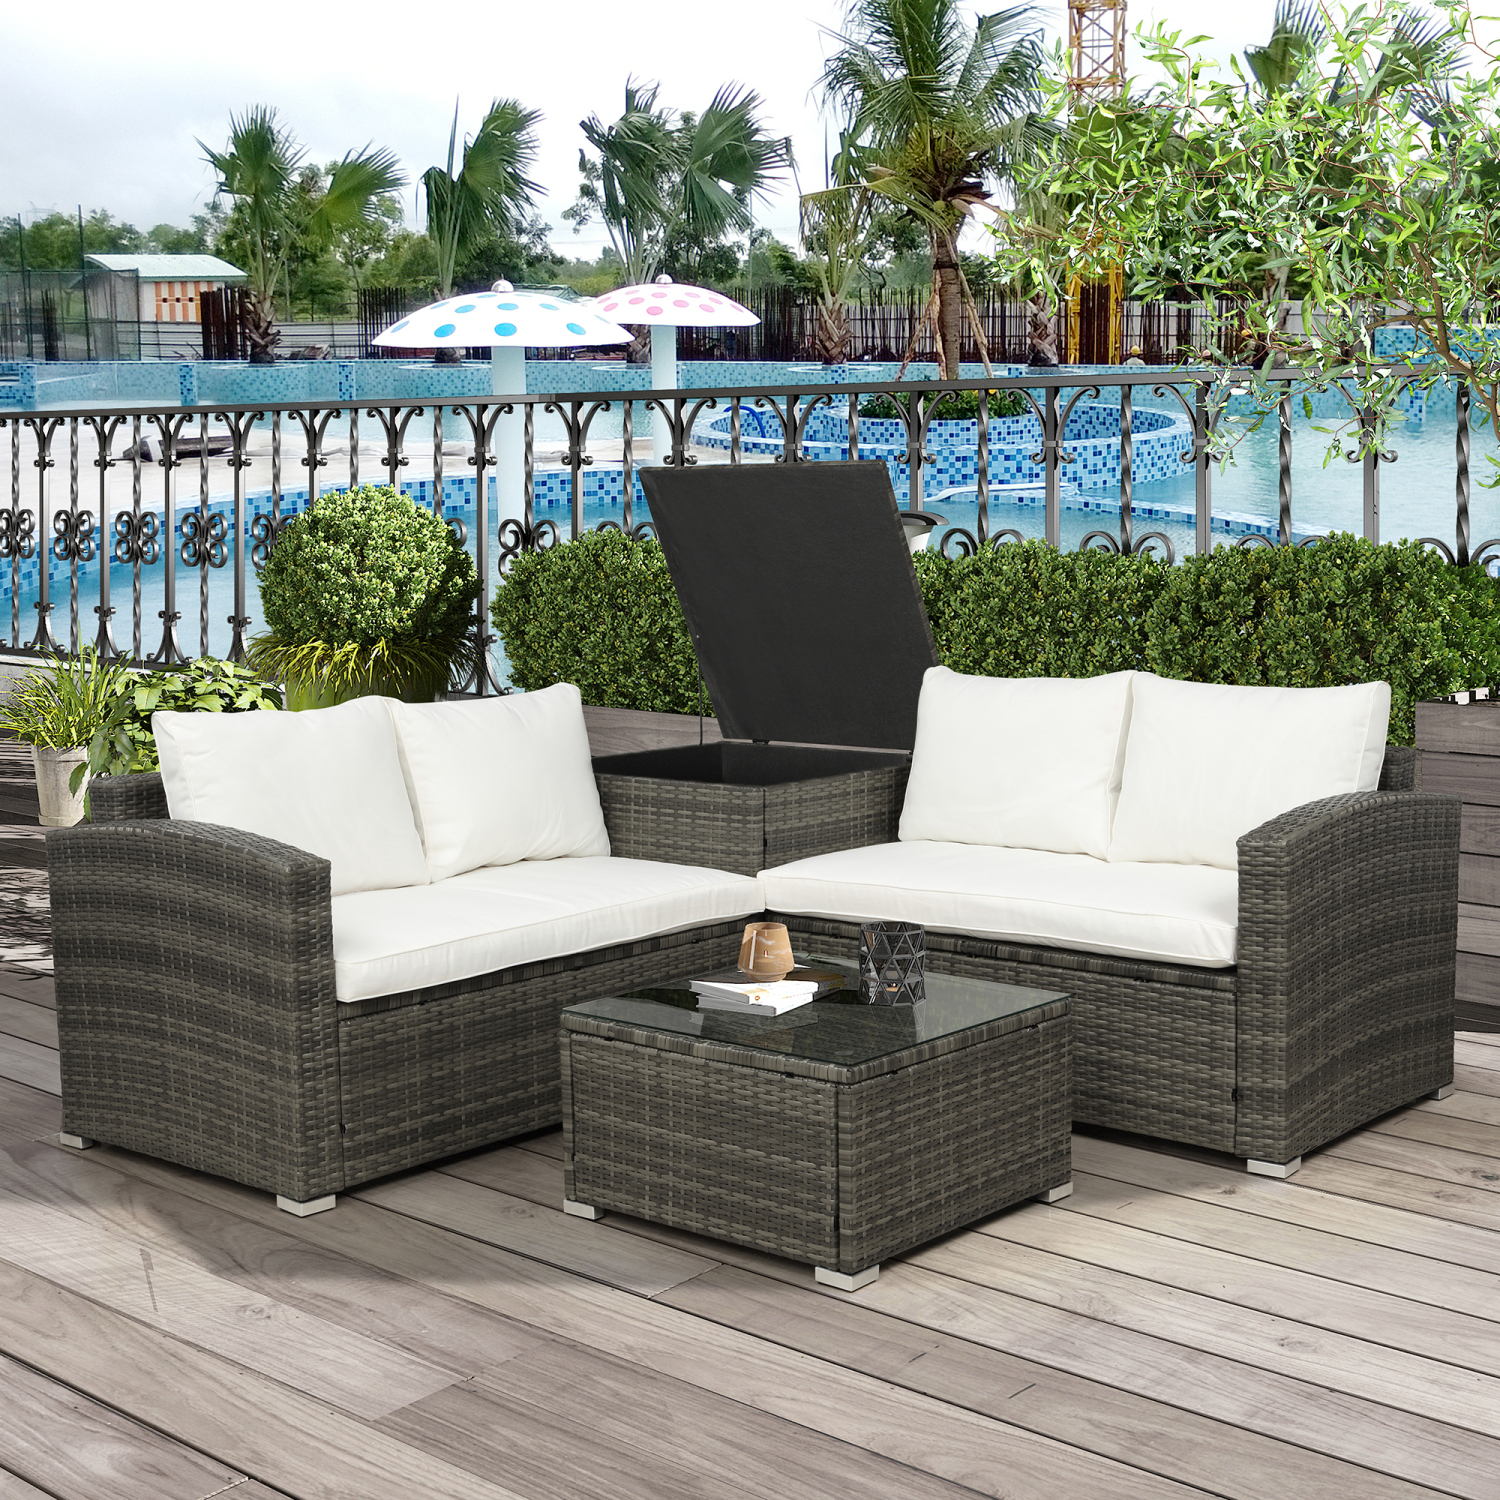 Clearance! TOPMAX 4 PCS Outdoor Cushioned PE Rattan Wicker Sectional Sofa Set Garden Patio Furniture Set (Beige Cushion) - image 1 of 9